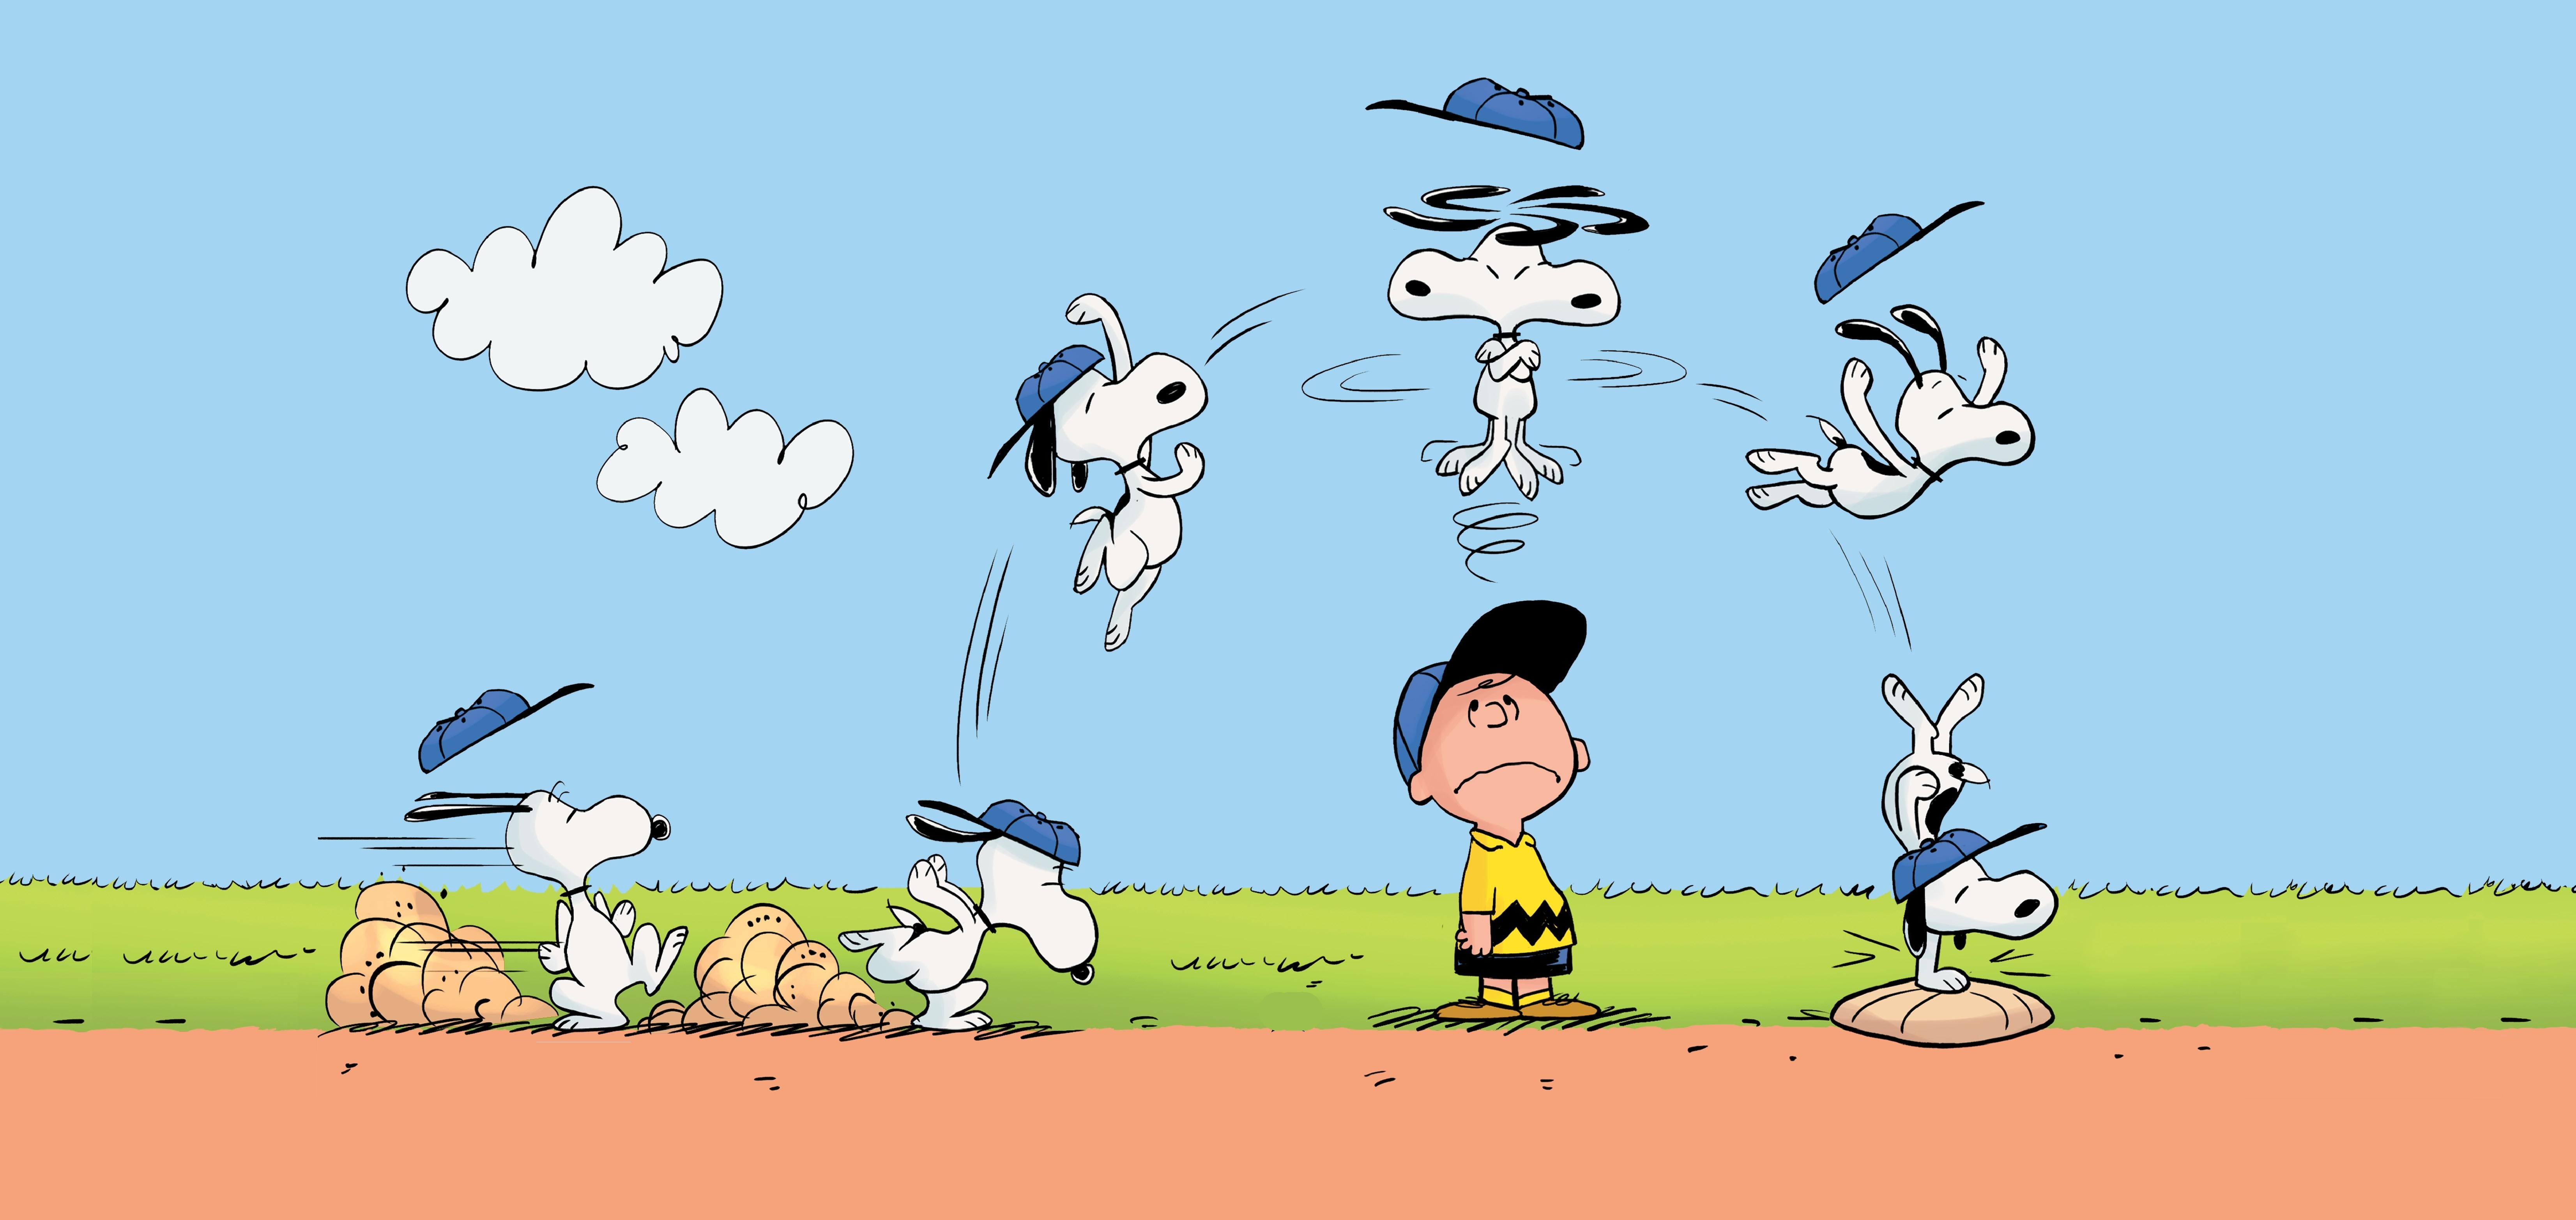 Charlie Brown Snoopy The Peanuts 6609x3131